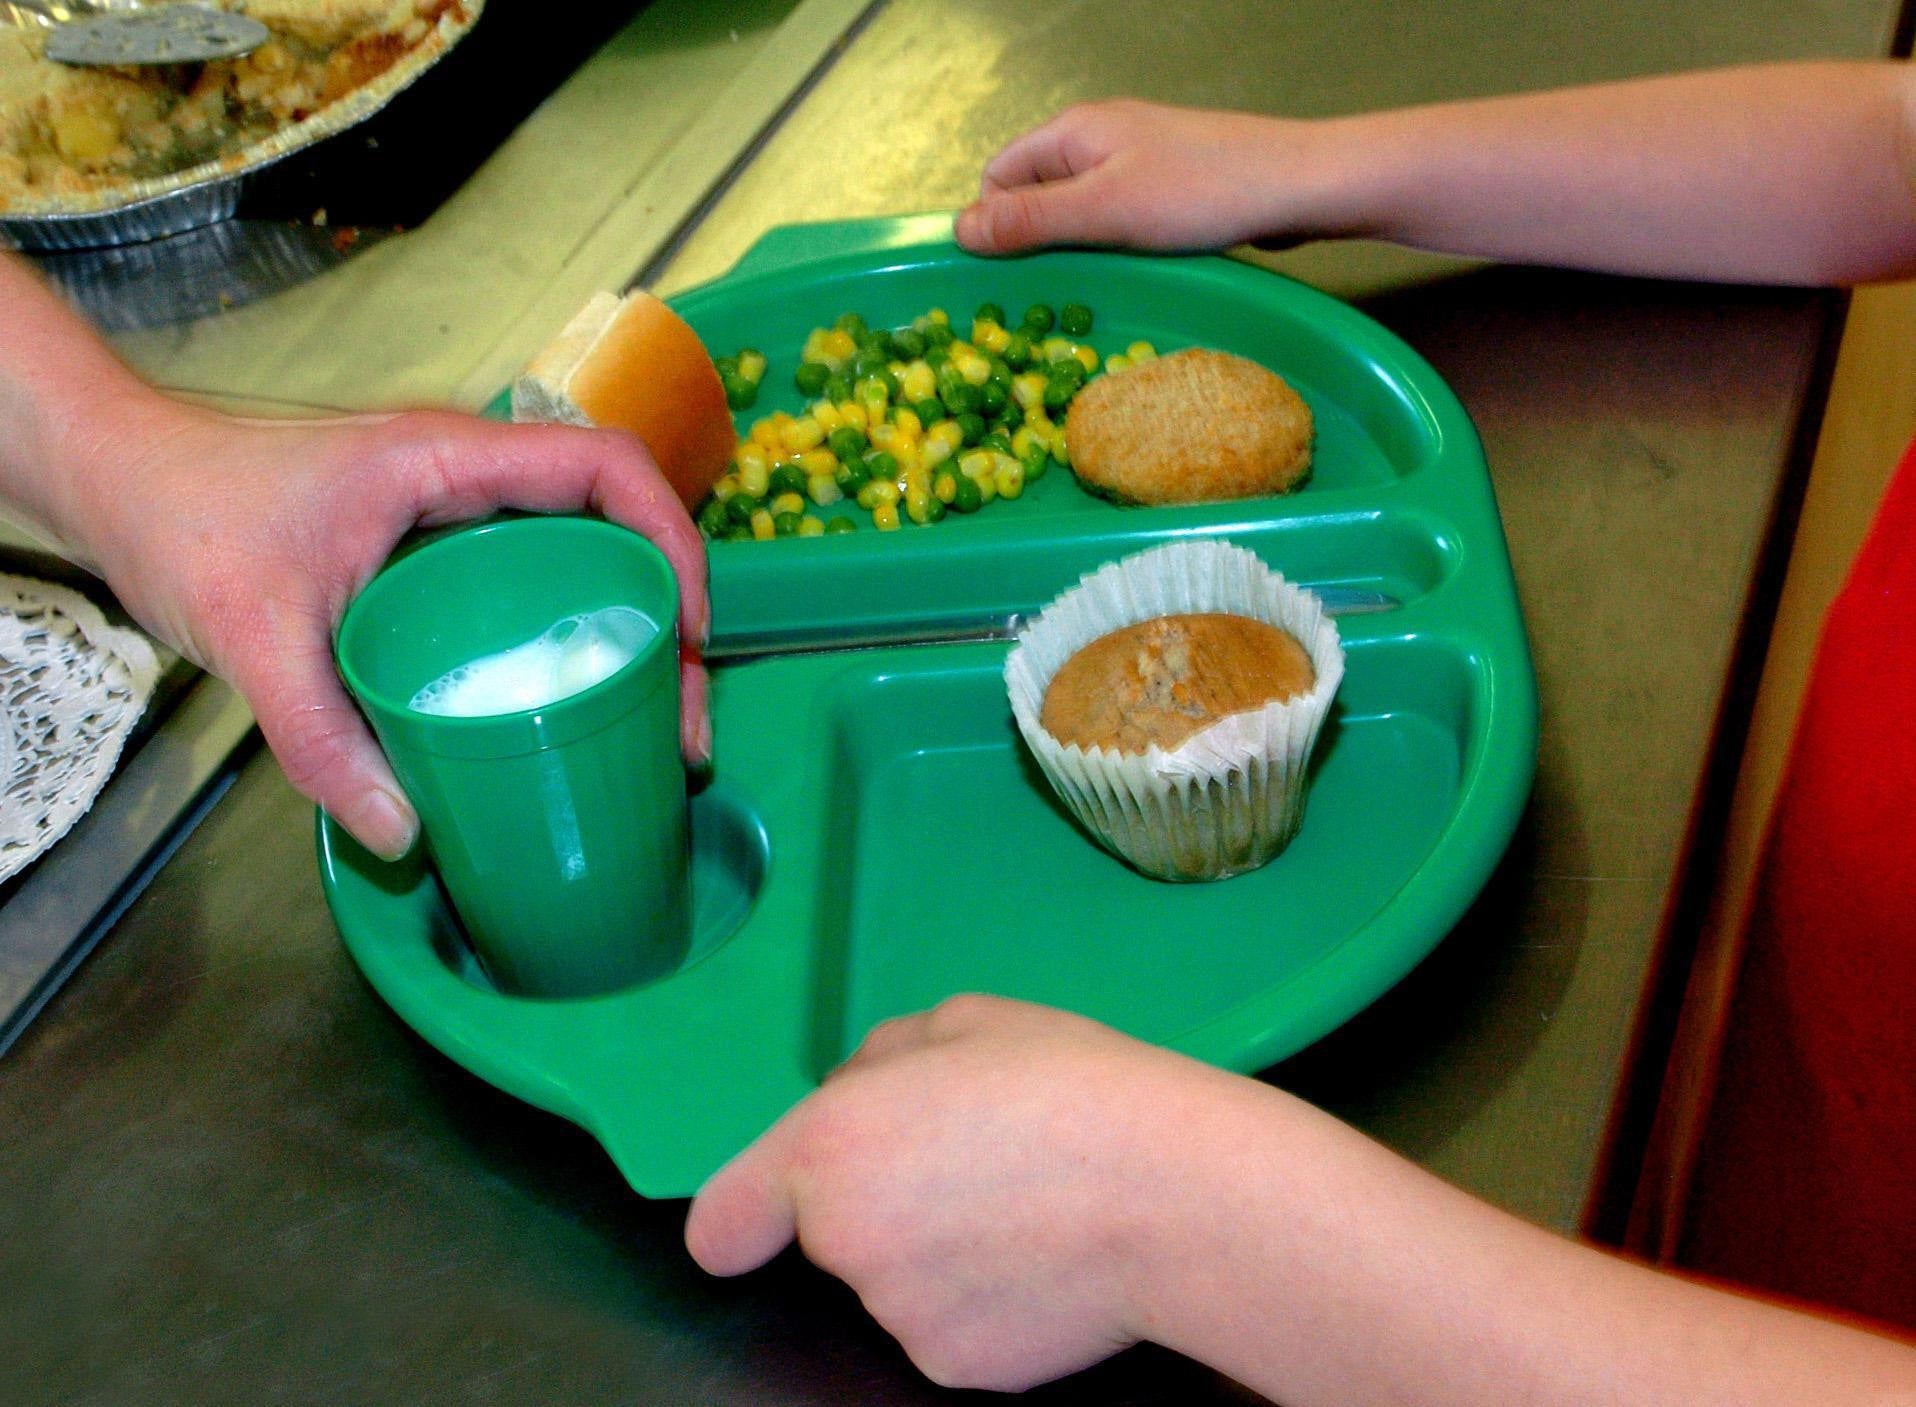 ‘Investing in the free school meals scheme would have long-term positive economic benefits’